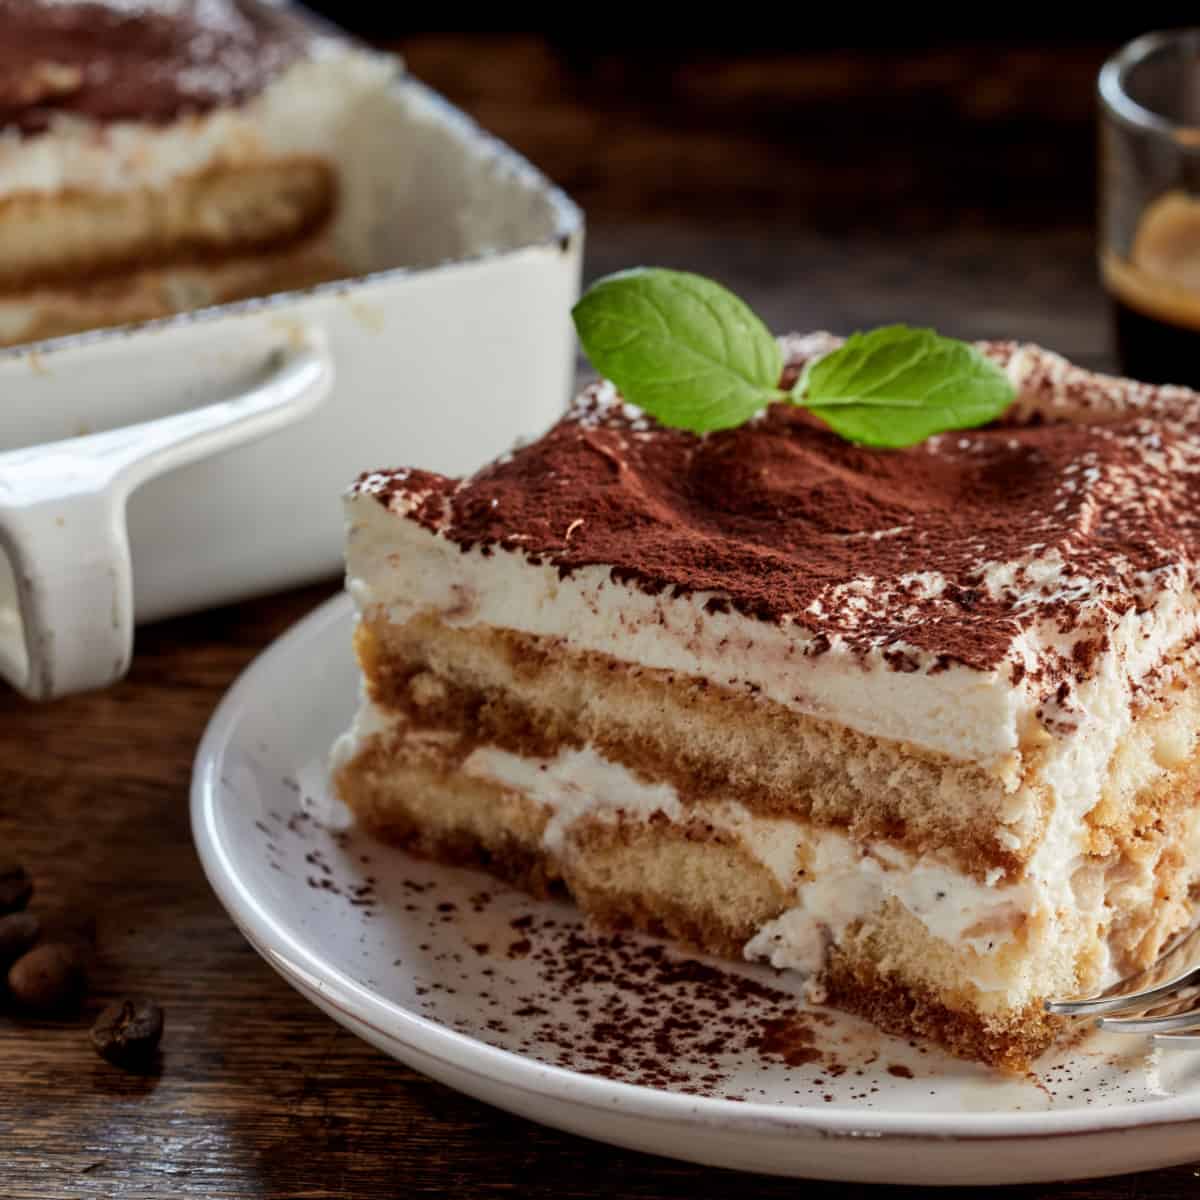 Gourmet tiramisu Italian dessert topped with a sprig of mint served on a plate at table in a side view